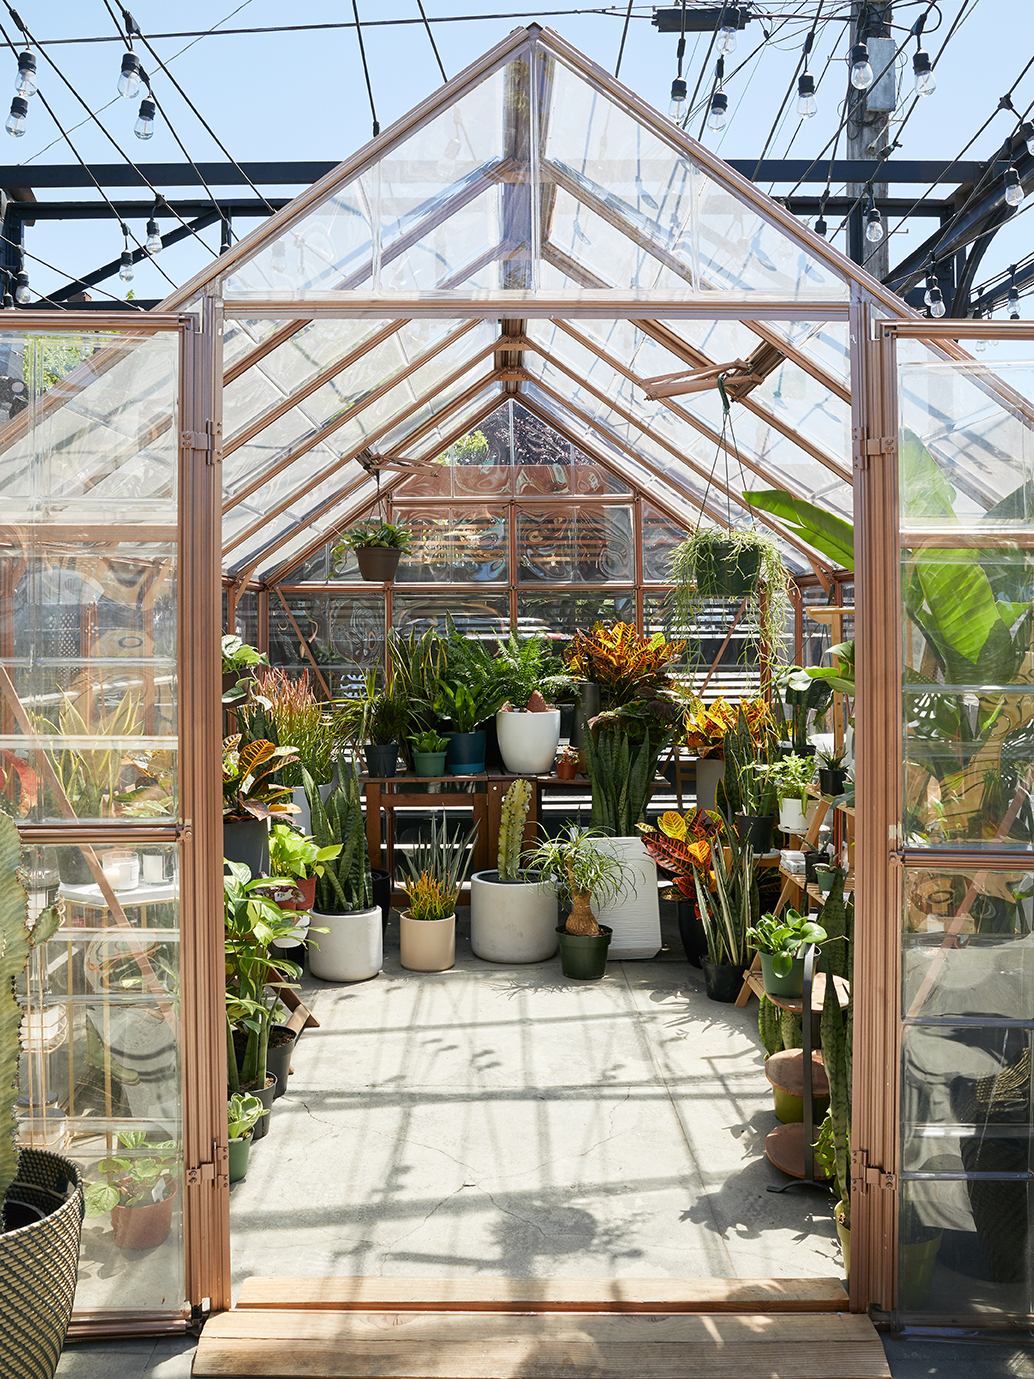 glass greenhouse filled with plants